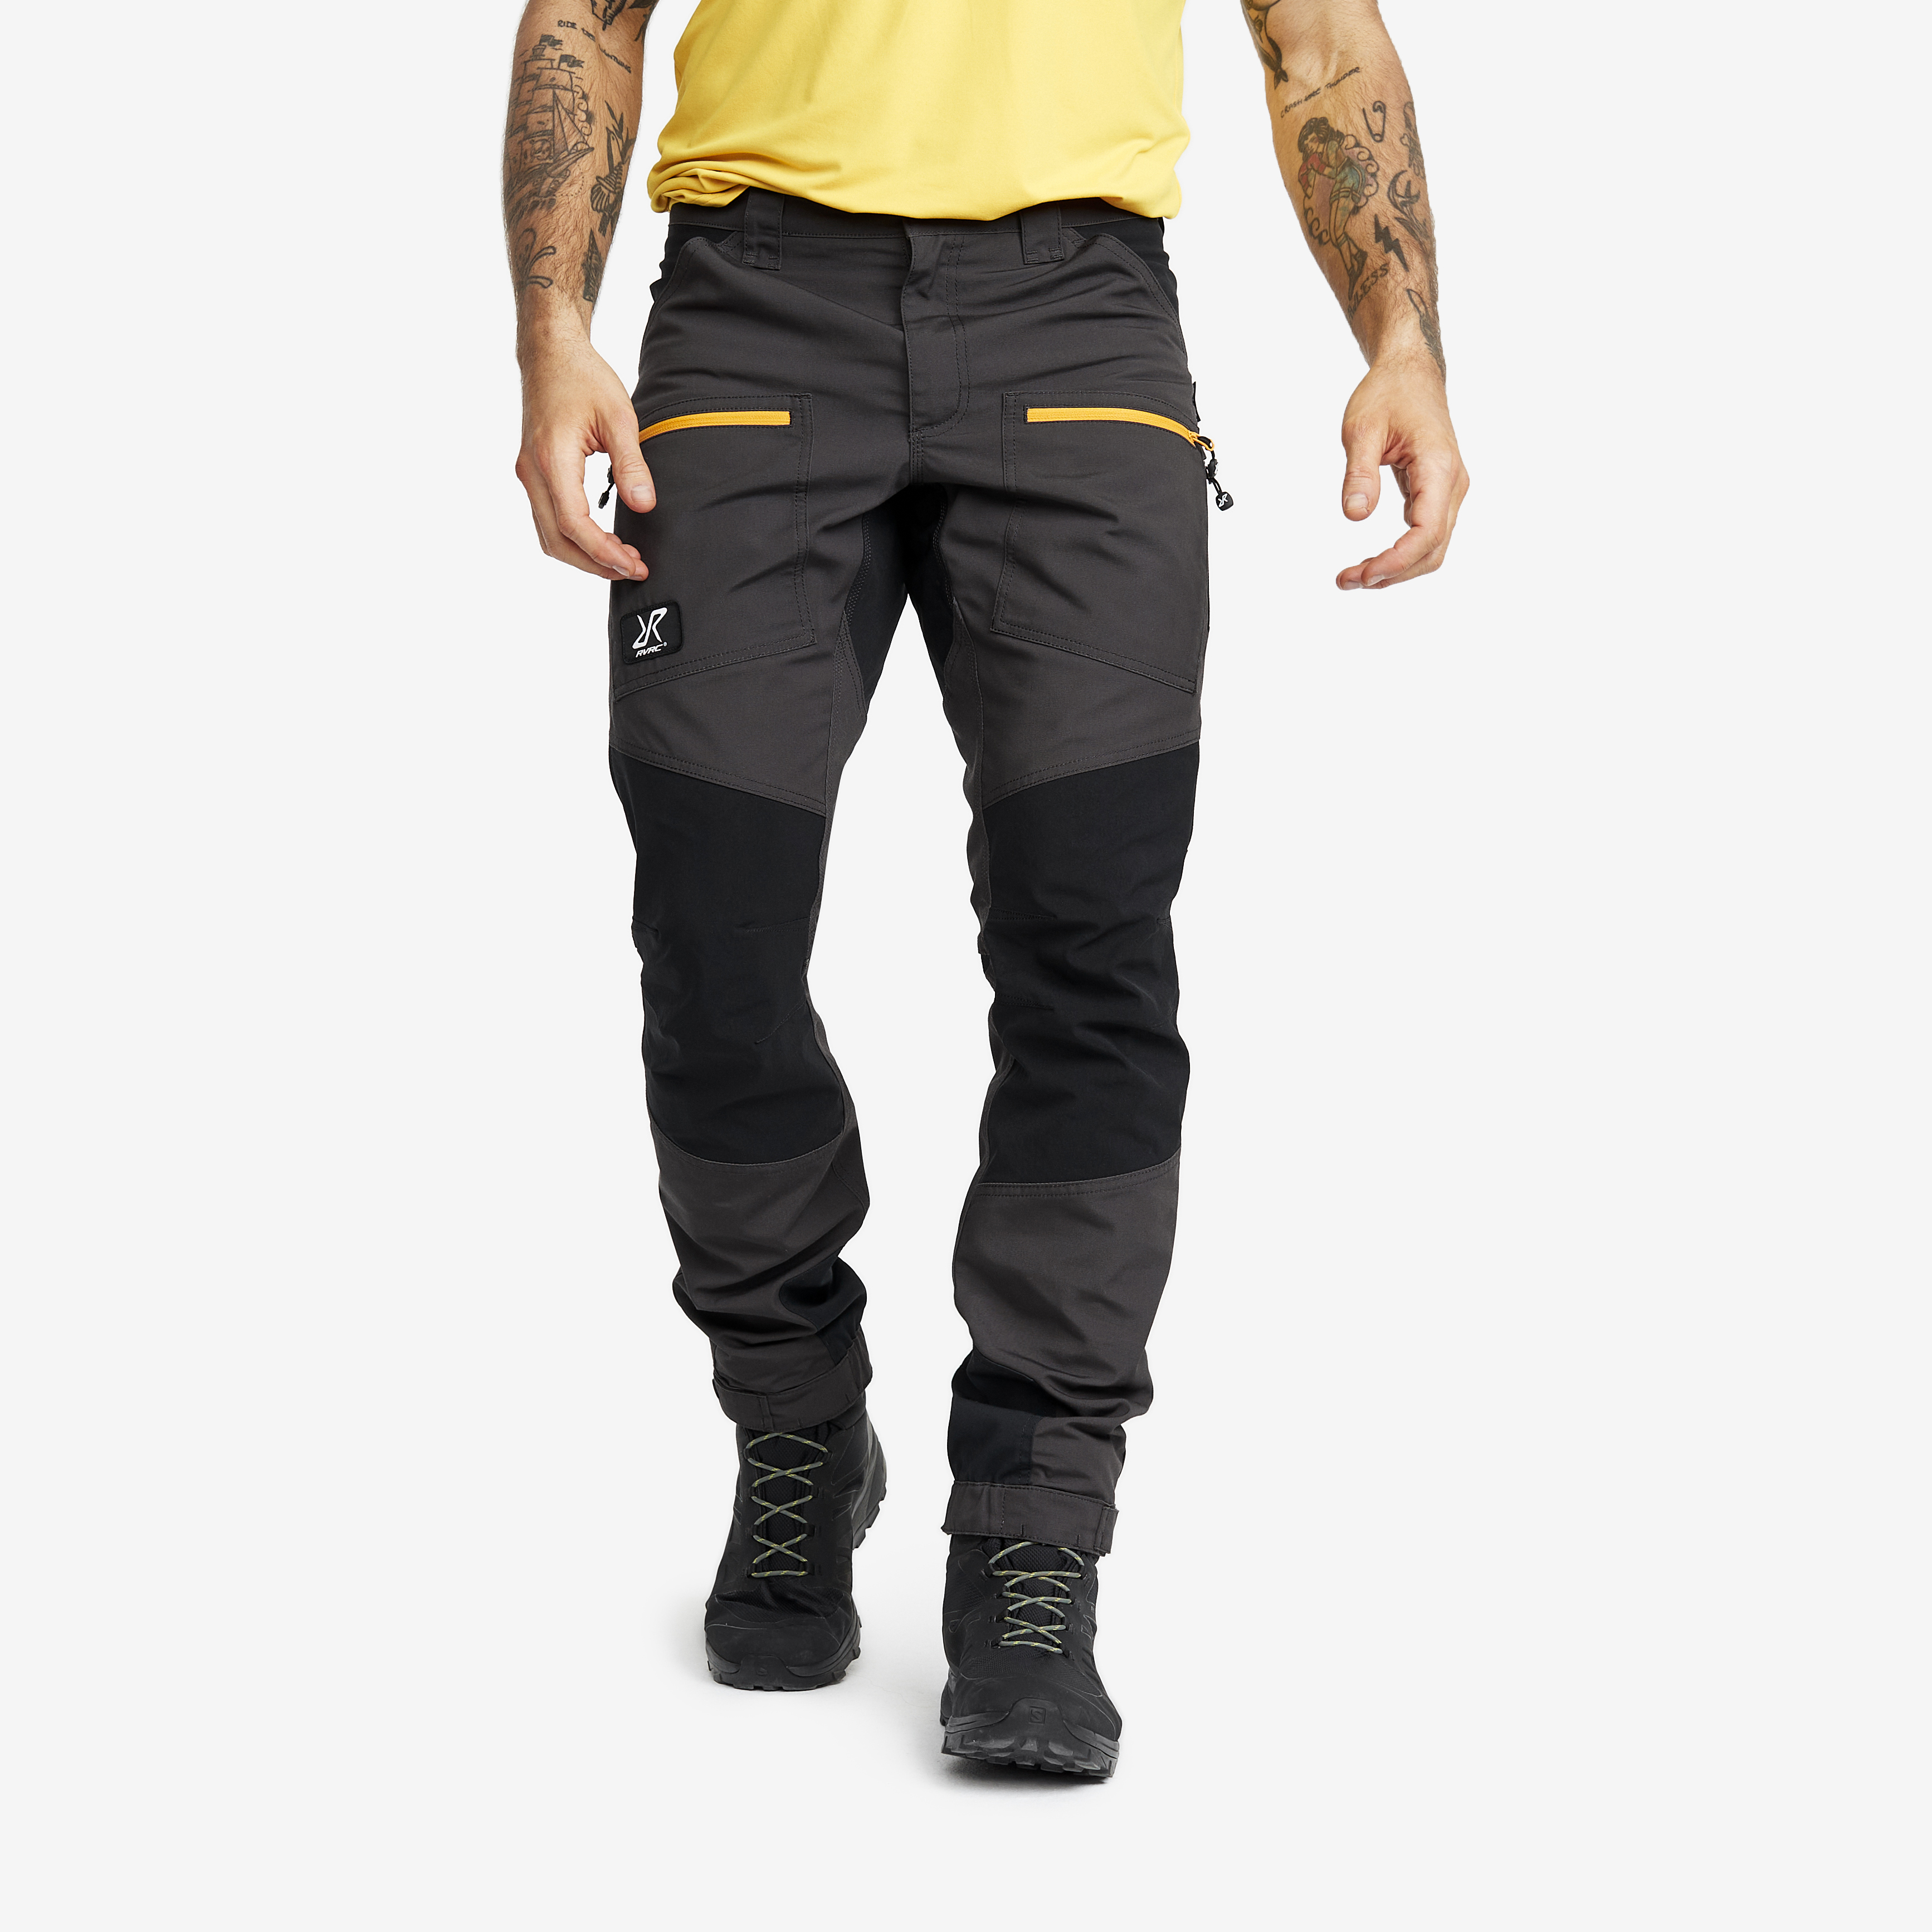 Nordwand Pro Pants Anthracite/Radiant Yellow Men